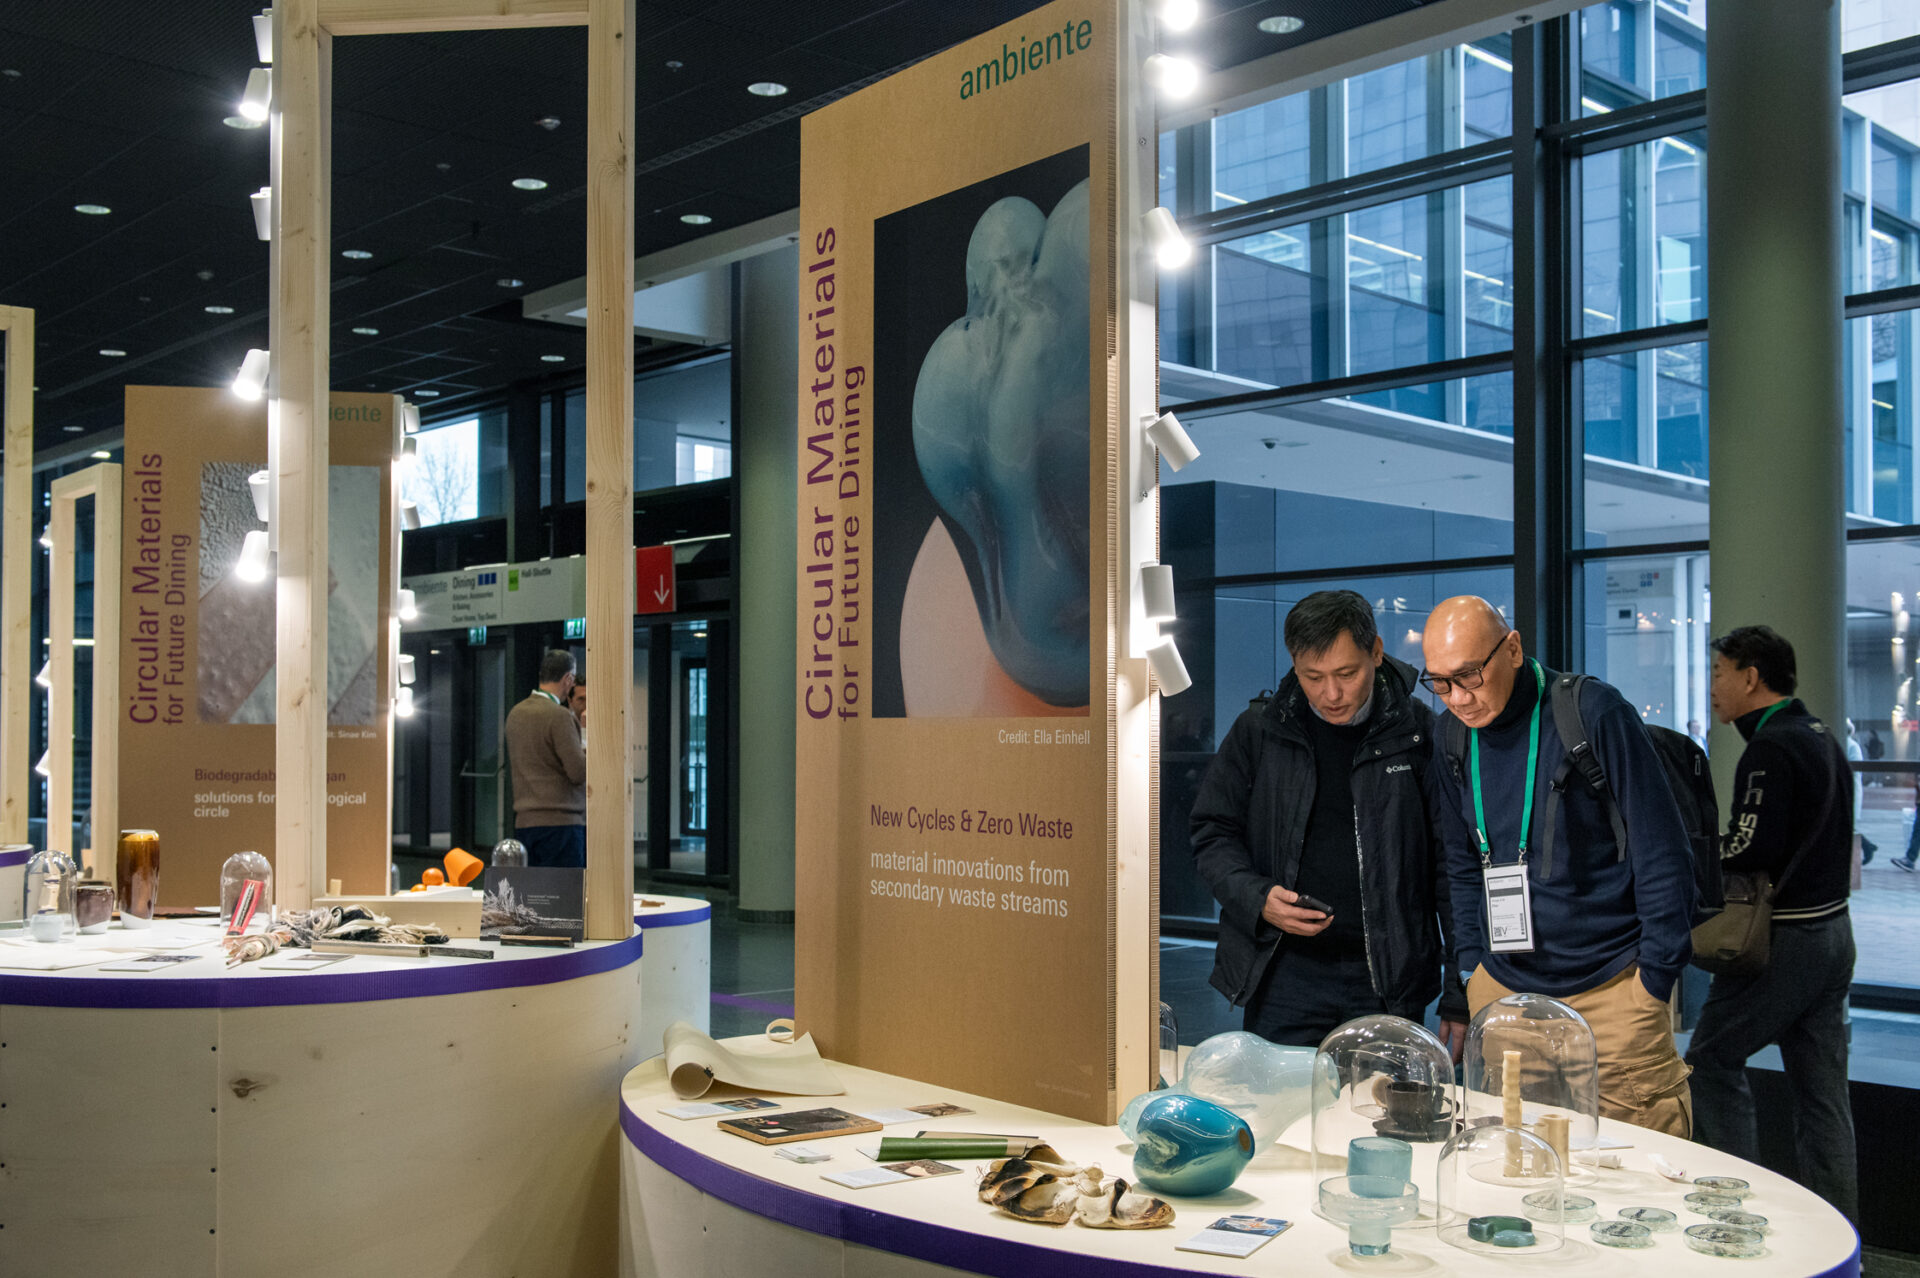 The special presentation "Circular Materials for Future Dining" focused on material development based on organic raw materials and set the tone for the future of tableware. Foto: Messe Frankfurt/Petra Wenzel.